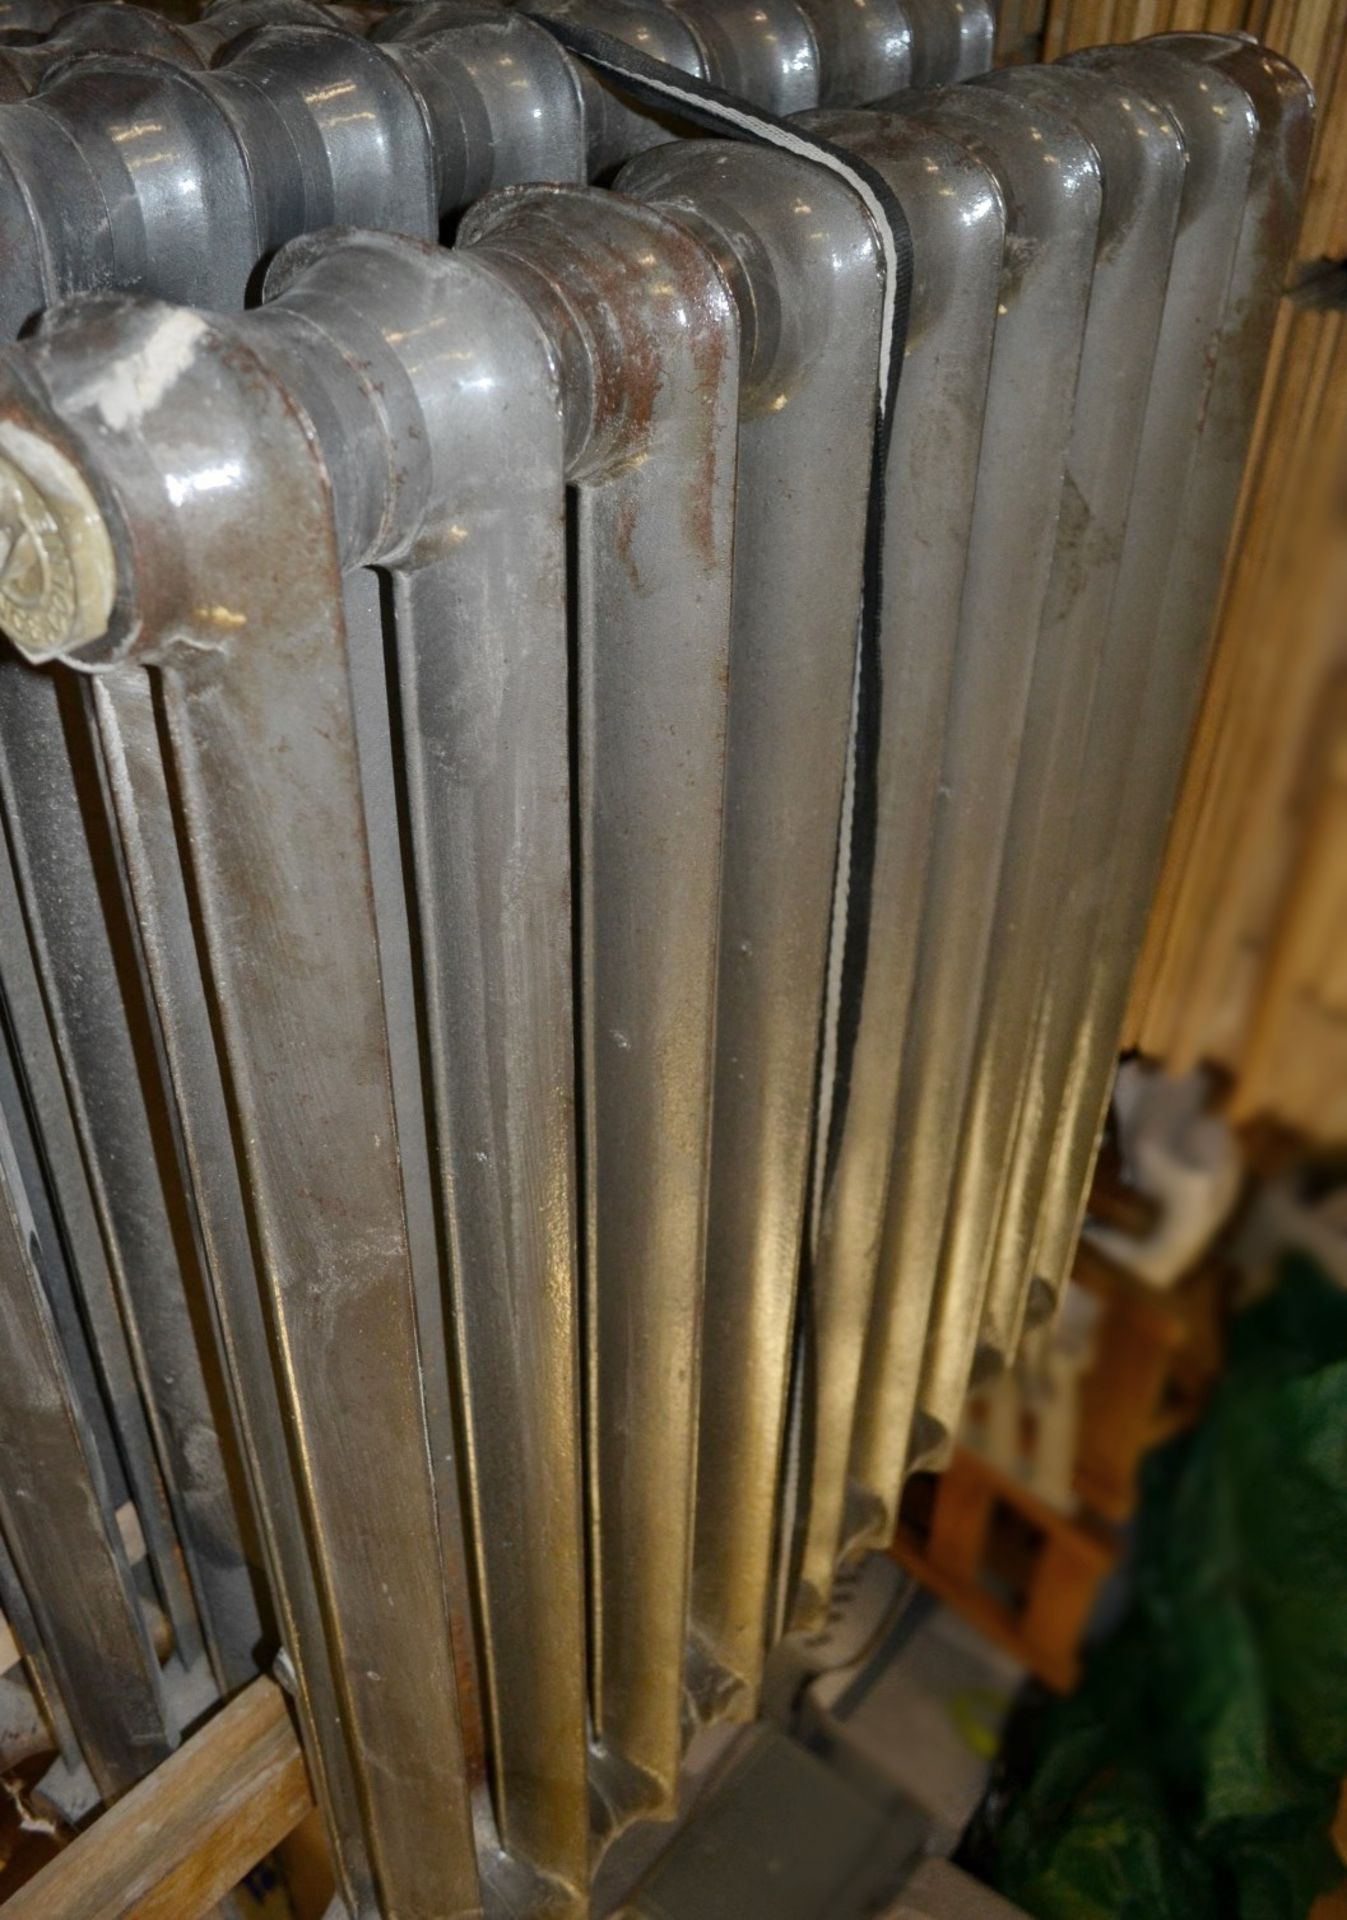 1 x Vintage Traditional Cast Iron 9-Section Radiator - Dimensions: W70 x H95cm - Ref: HM264/9sec - Image 2 of 6